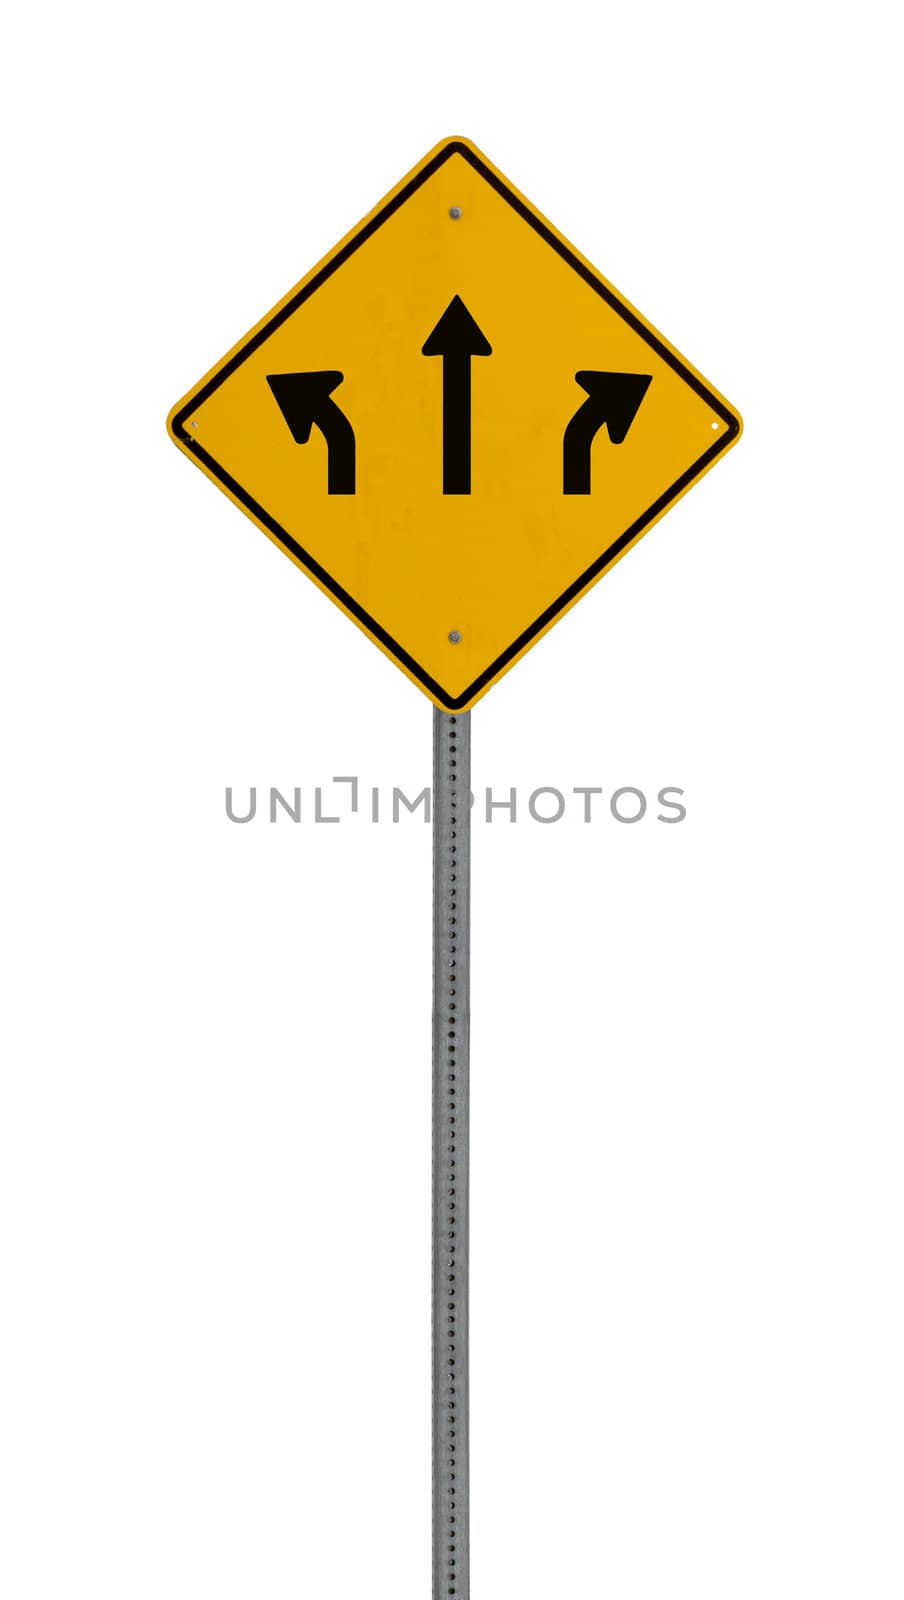 A yellow road warning sign isolated on white. Includes clipping path.